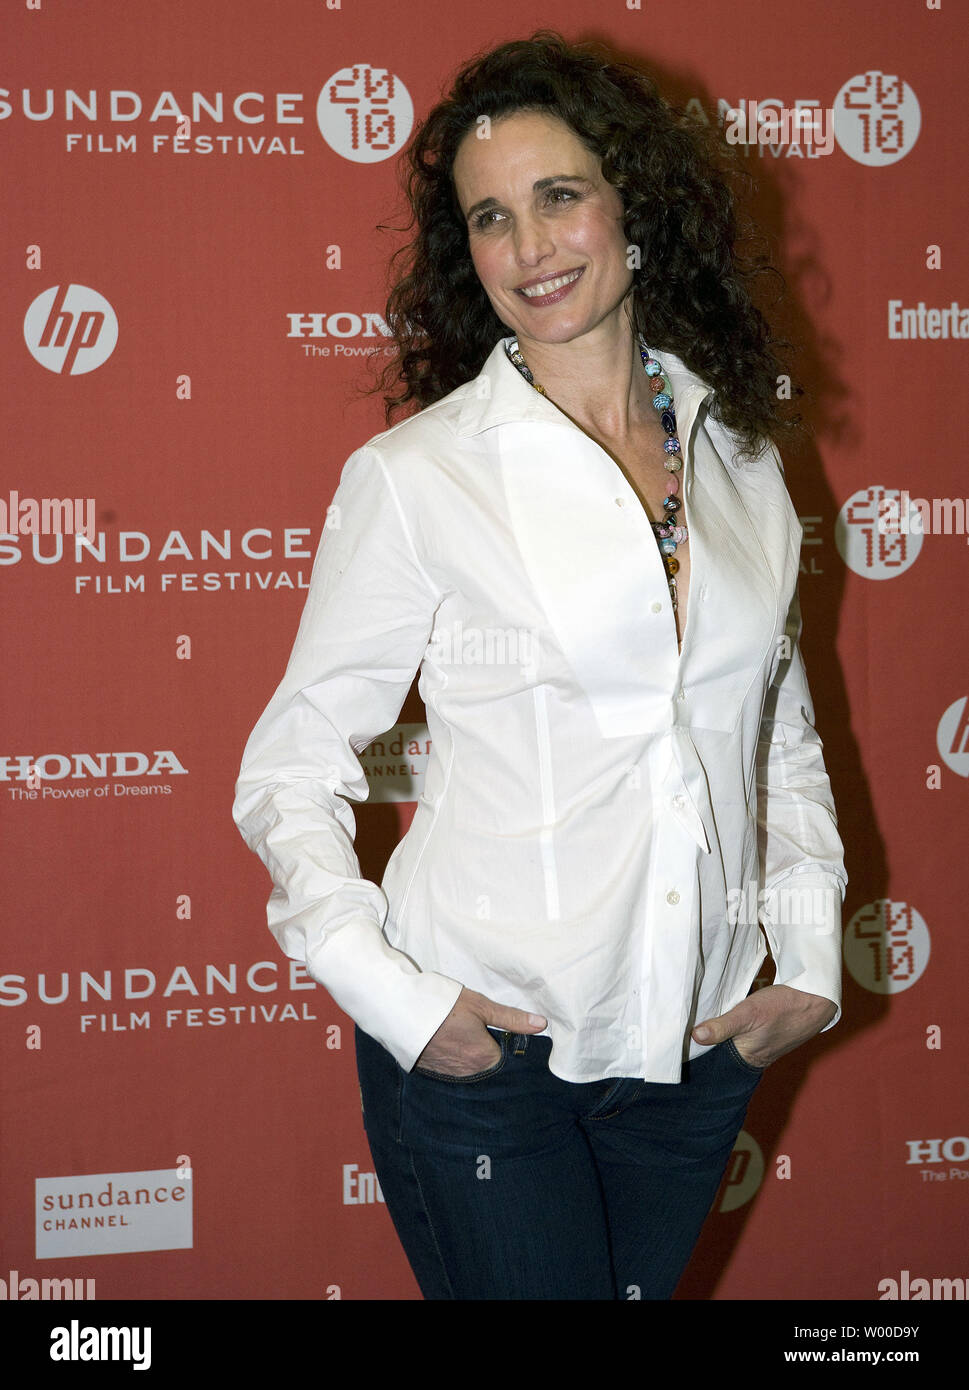 Actress Andie McDowell arrives for the world premiere of 'Howl' at the 2010 Sundance Film Festival on January 21, 2010 in Park City, Utah.         UPI/Gary C. Caskey.. Stock Photo